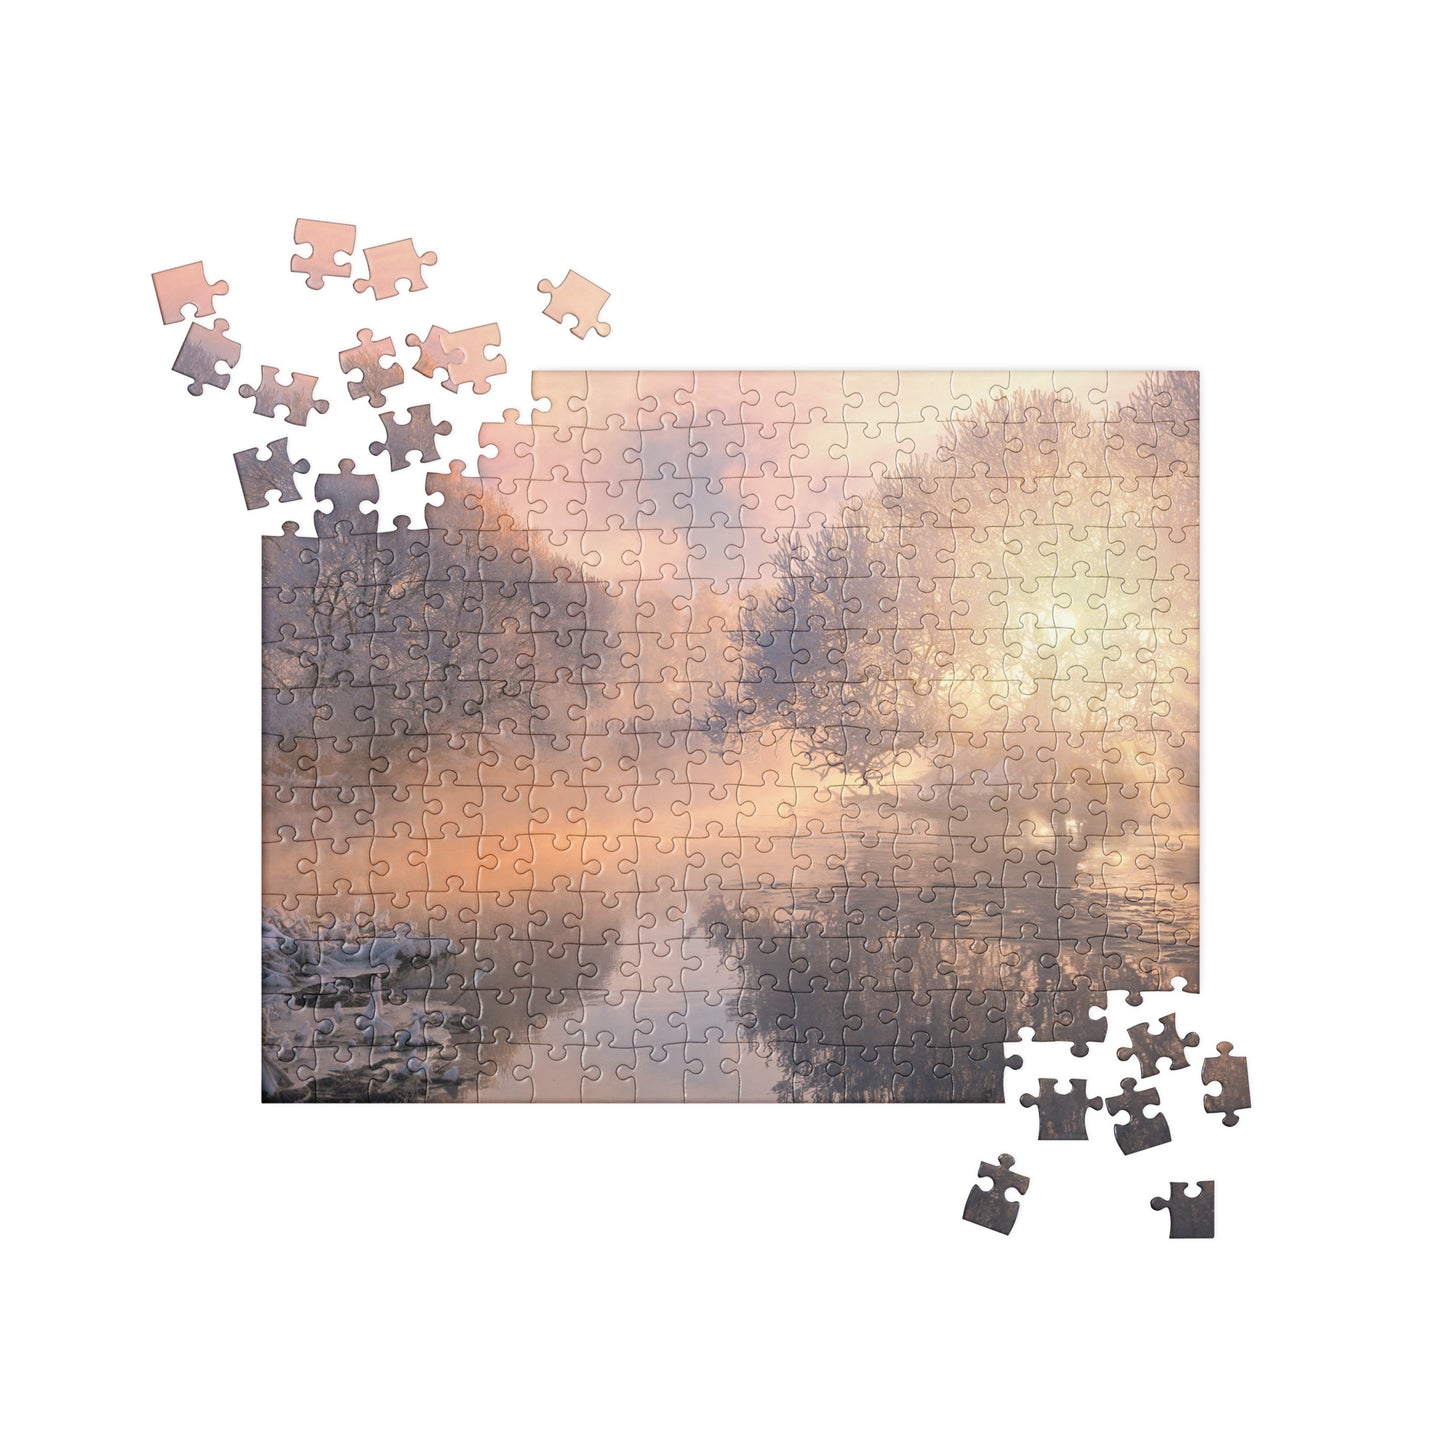 Winter Jigsaw Puzzle: Winter by the Water